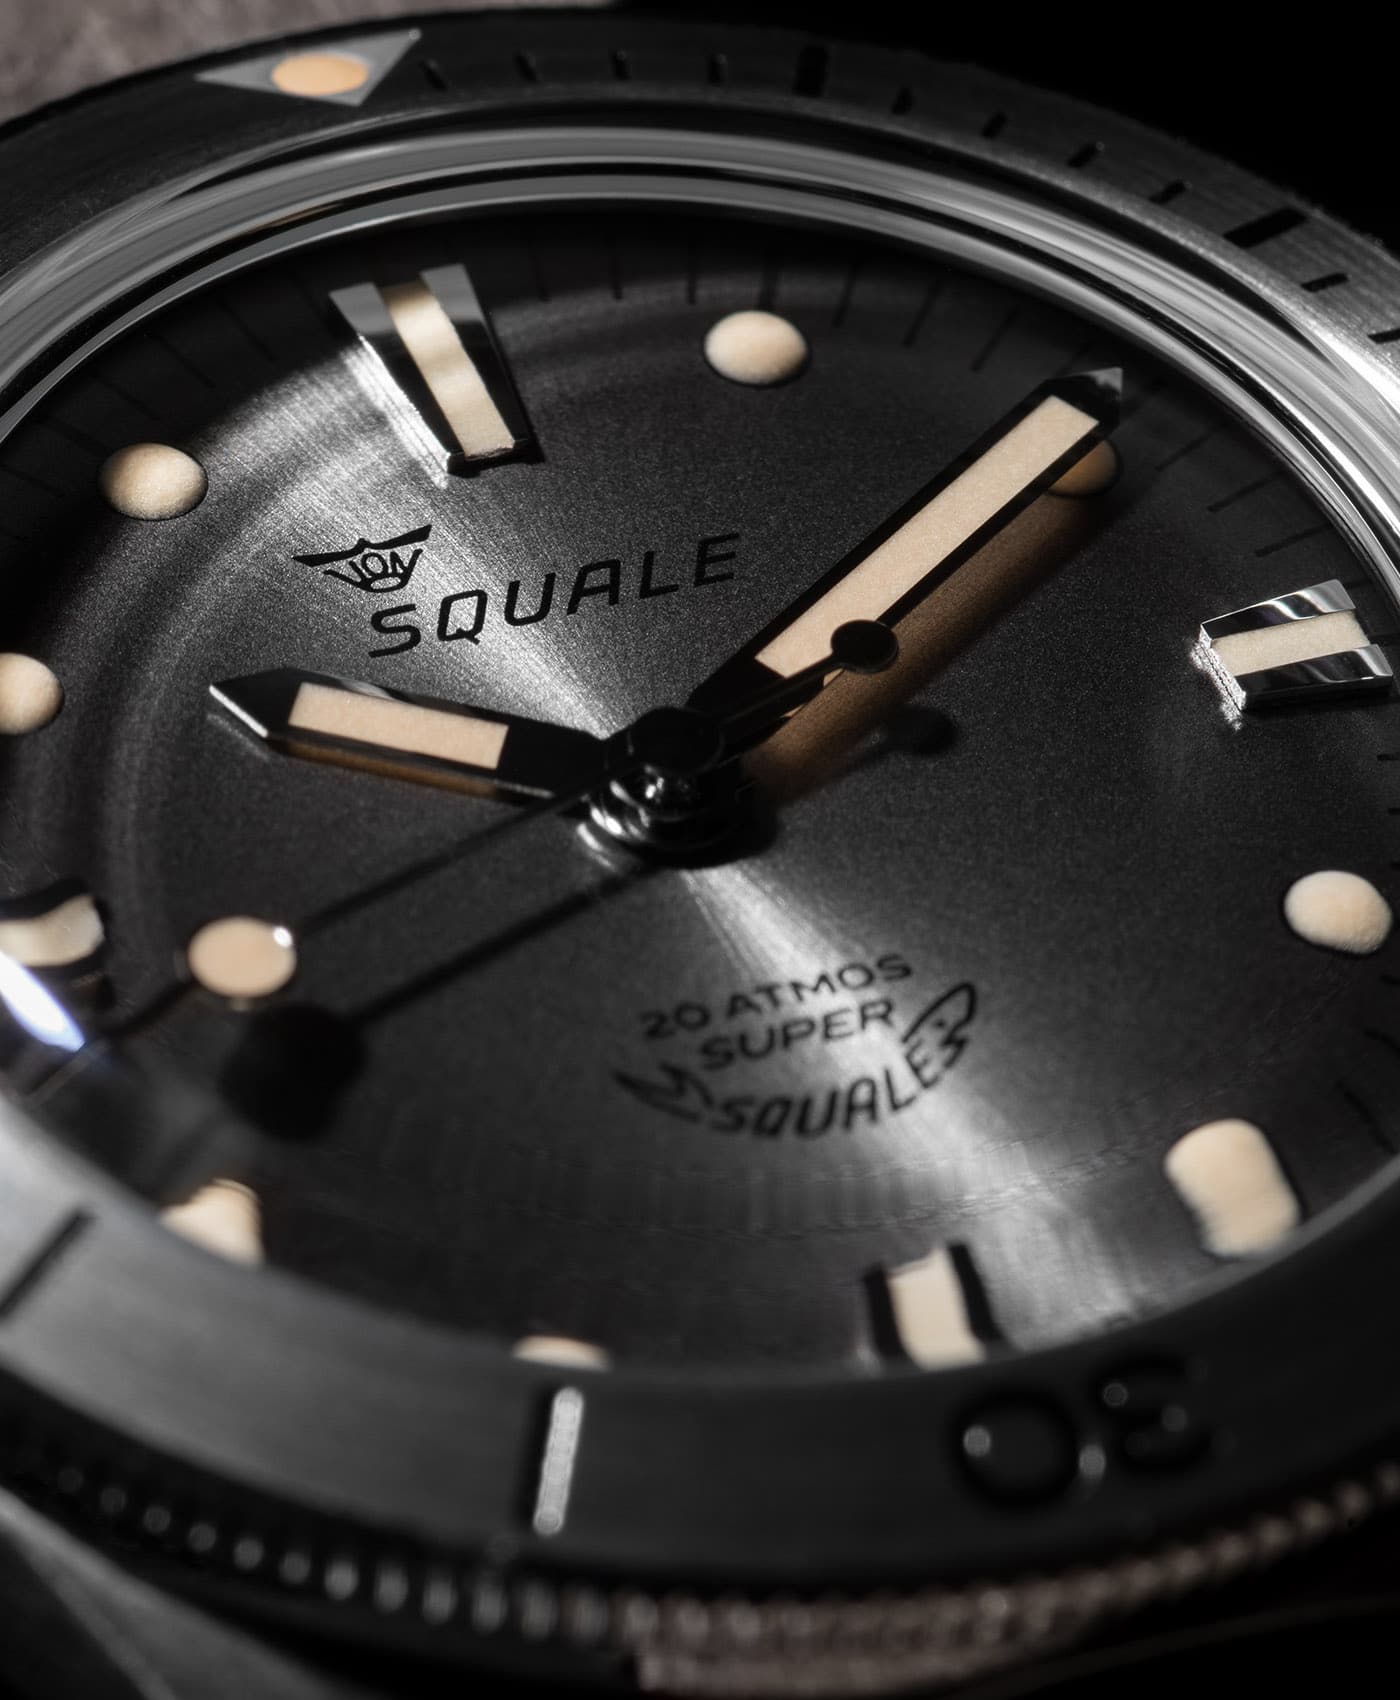 Squale - Super-Squale - Sunray Grey - dial close up-min